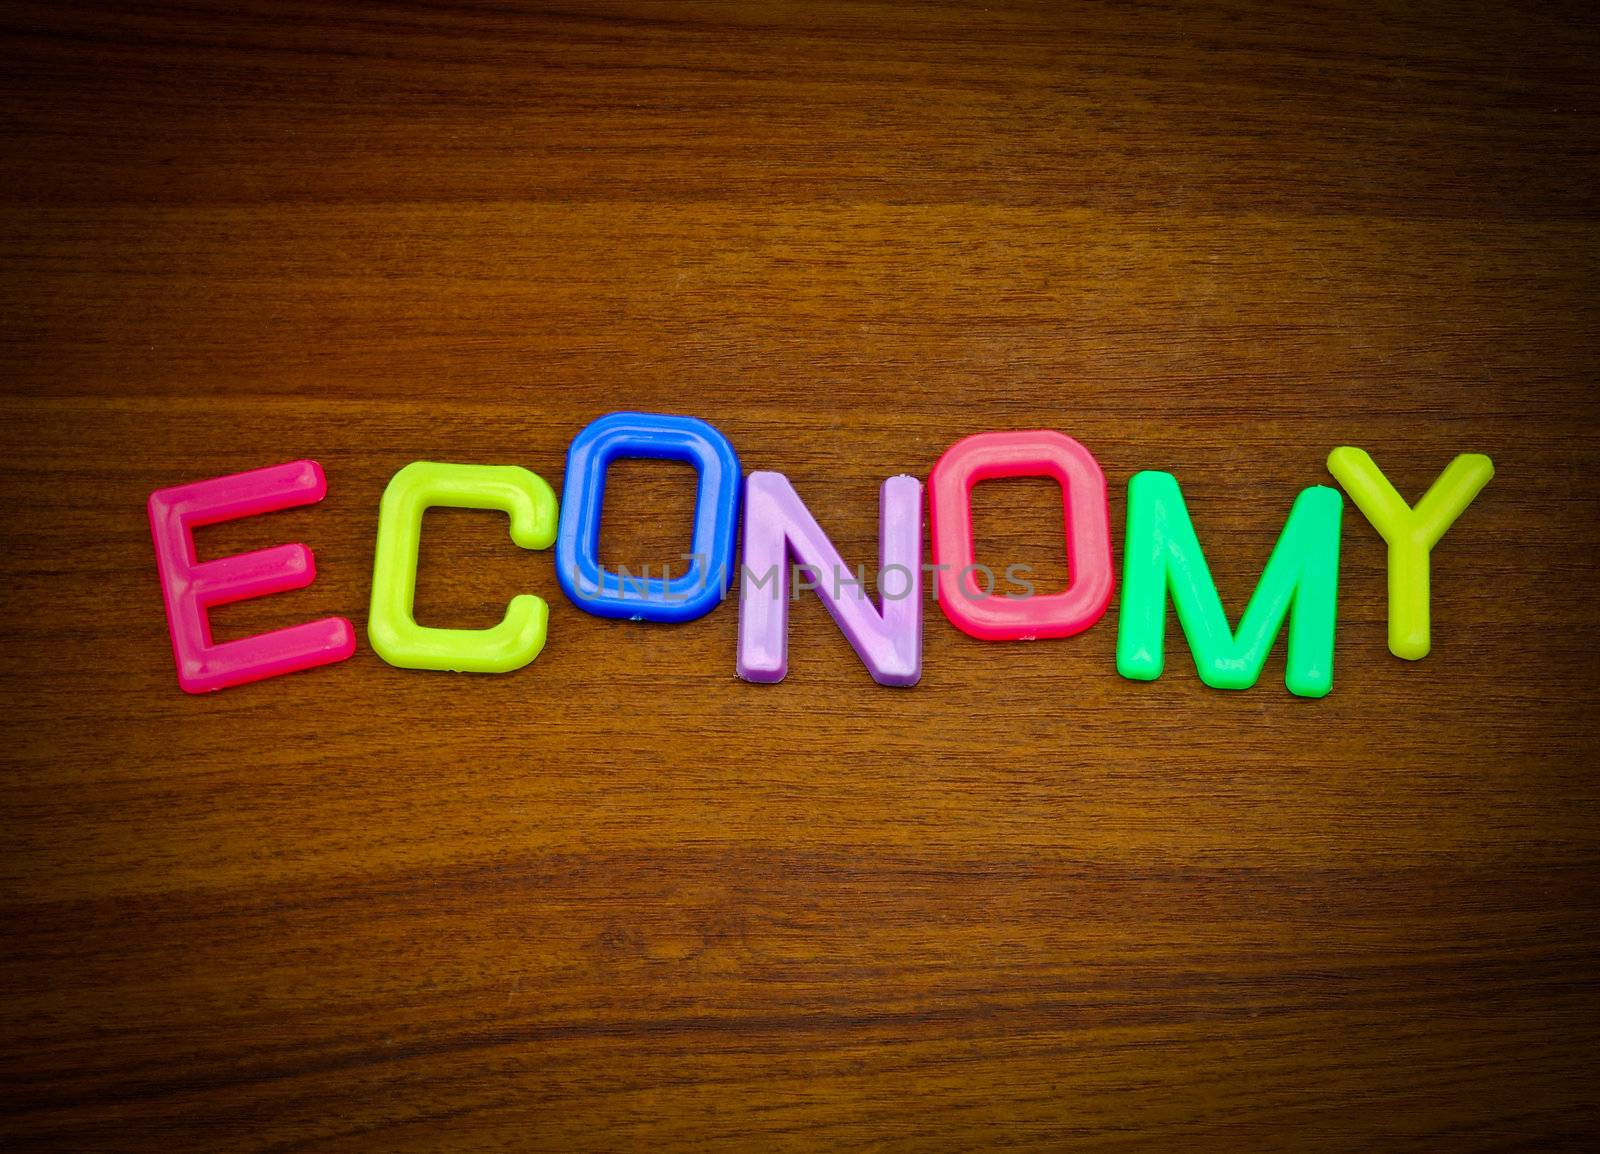 Economy in colorful toy letters on wood background  by nuchylee